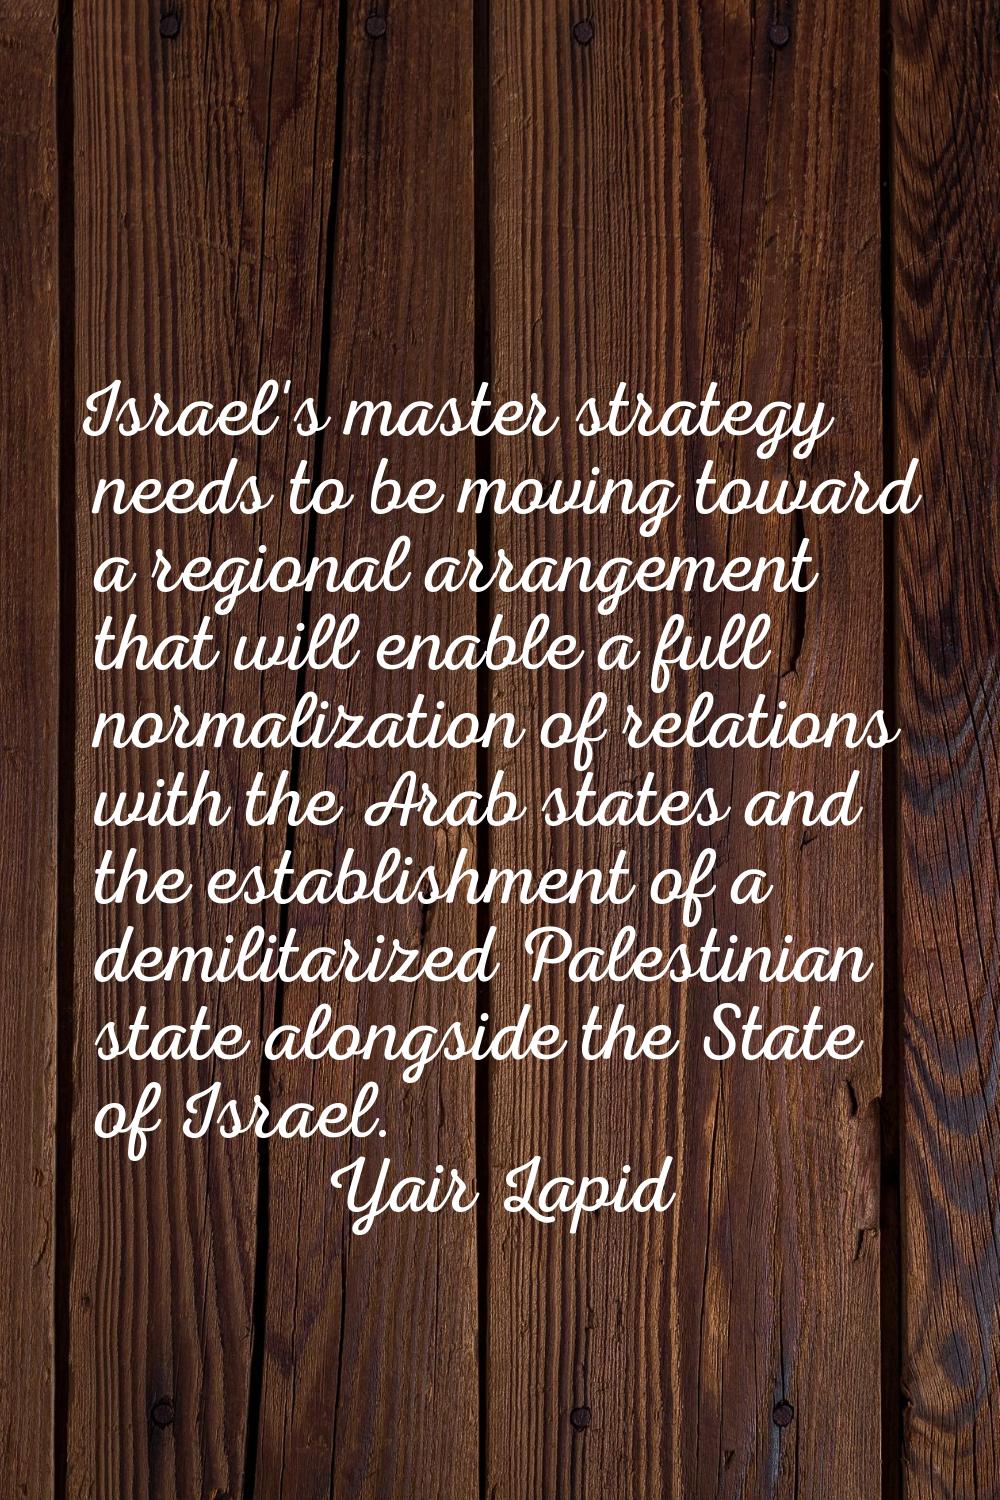 Israel's master strategy needs to be moving toward a regional arrangement that will enable a full n